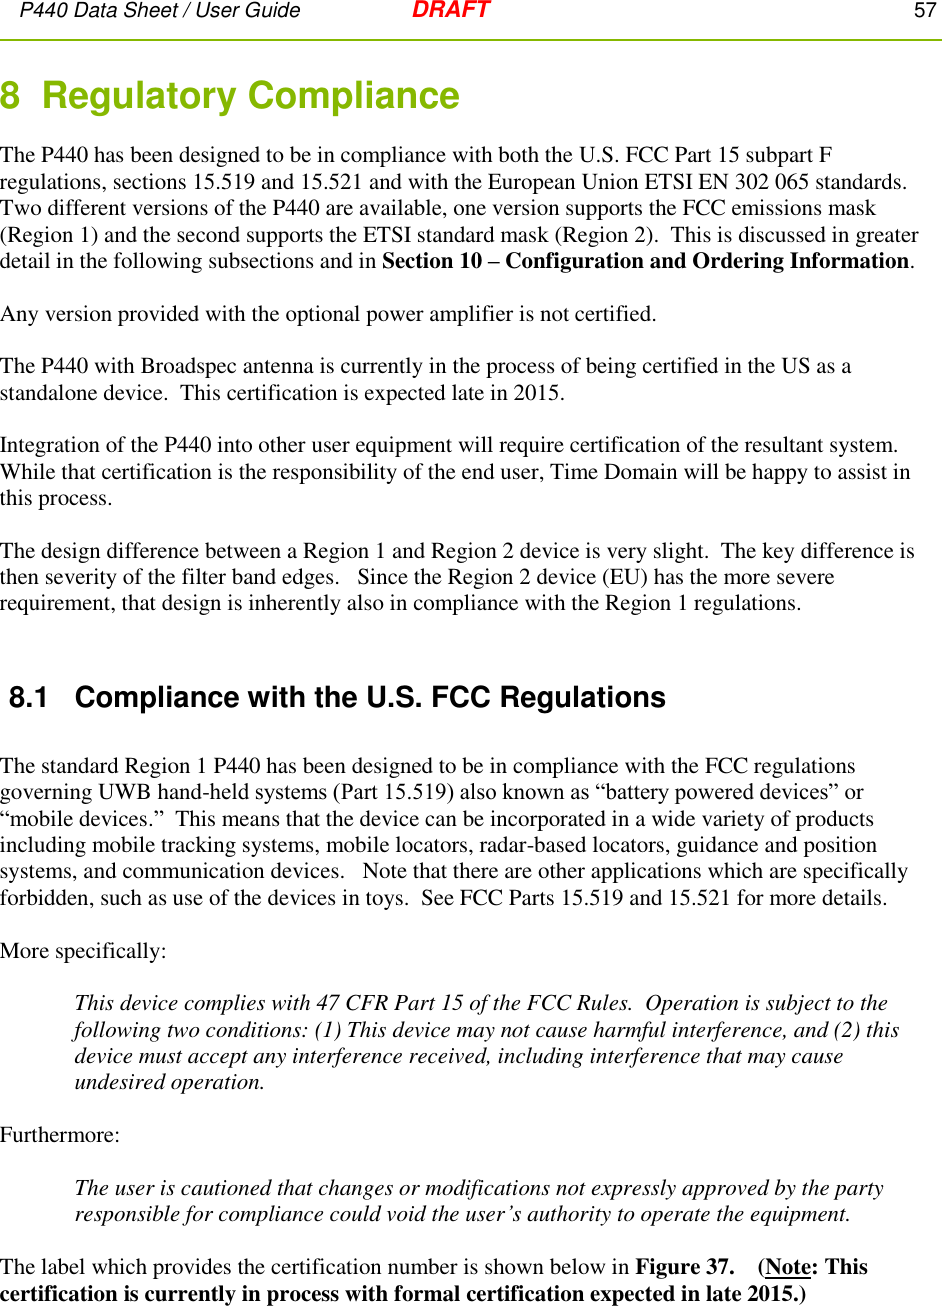 P440 Data Sheet / User Guide   DRAFT    57         8  Regulatory Compliance  The P440 has been designed to be in compliance with both the U.S. FCC Part 15 subpart F regulations, sections 15.519 and 15.521 and with the European Union ETSI EN 302 065 standards.   Two different versions of the P440 are available, one version supports the FCC emissions mask (Region 1) and the second supports the ETSI standard mask (Region 2).  This is discussed in greater detail in the following subsections and in Section 10 – Configuration and Ordering Information.    Any version provided with the optional power amplifier is not certified.  The P440 with Broadspec antenna is currently in the process of being certified in the US as a standalone device.  This certification is expected late in 2015.   Integration of the P440 into other user equipment will require certification of the resultant system.  While that certification is the responsibility of the end user, Time Domain will be happy to assist in this process.  The design difference between a Region 1 and Region 2 device is very slight.  The key difference is then severity of the filter band edges.   Since the Region 2 device (EU) has the more severe requirement, that design is inherently also in compliance with the Region 1 regulations.  8.1  Compliance with the U.S. FCC Regulations  The standard Region 1 P440 has been designed to be in compliance with the FCC regulations governing UWB hand-held systems (Part 15.519) also known as “battery powered devices” or “mobile devices.”  This means that the device can be incorporated in a wide variety of products including mobile tracking systems, mobile locators, radar-based locators, guidance and position systems, and communication devices.   Note that there are other applications which are specifically forbidden, such as use of the devices in toys.  See FCC Parts 15.519 and 15.521 for more details.  More specifically:  This device complies with 47 CFR Part 15 of the FCC Rules.  Operation is subject to the following two conditions: (1) This device may not cause harmful interference, and (2) this device must accept any interference received, including interference that may cause undesired operation.  Furthermore:  The user is cautioned that changes or modifications not expressly approved by the party responsible for compliance could void the user’s authority to operate the equipment.  The label which provides the certification number is shown below in Figure 37.    (Note: This certification is currently in process with formal certification expected in late 2015.) 